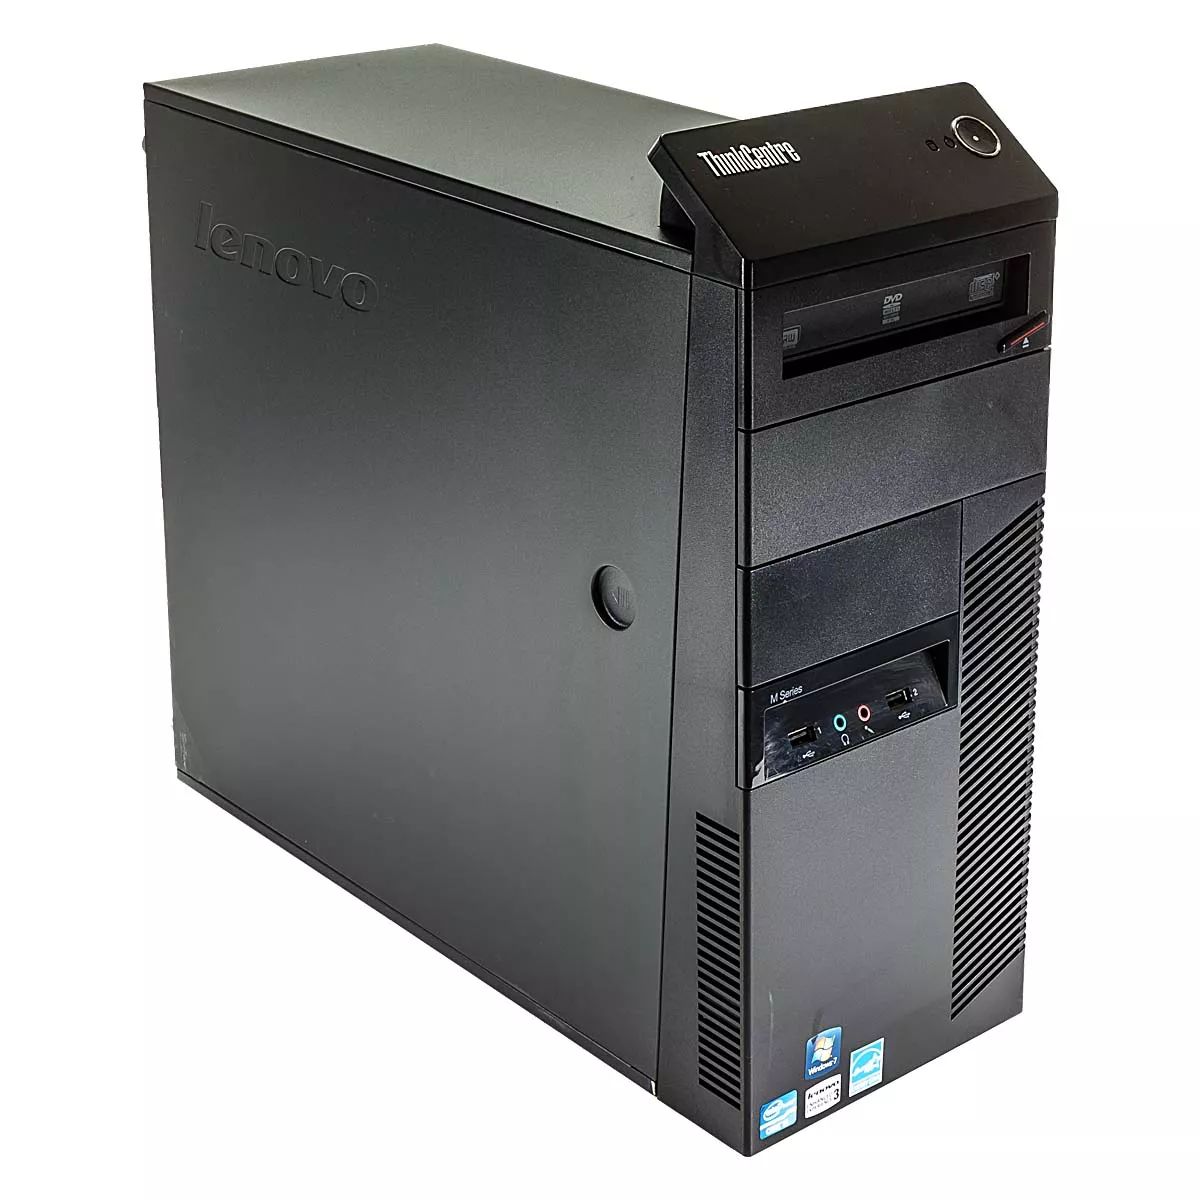 Lenovo Thinkcentre M83 Tower Core i3 4130 3,4 GHz